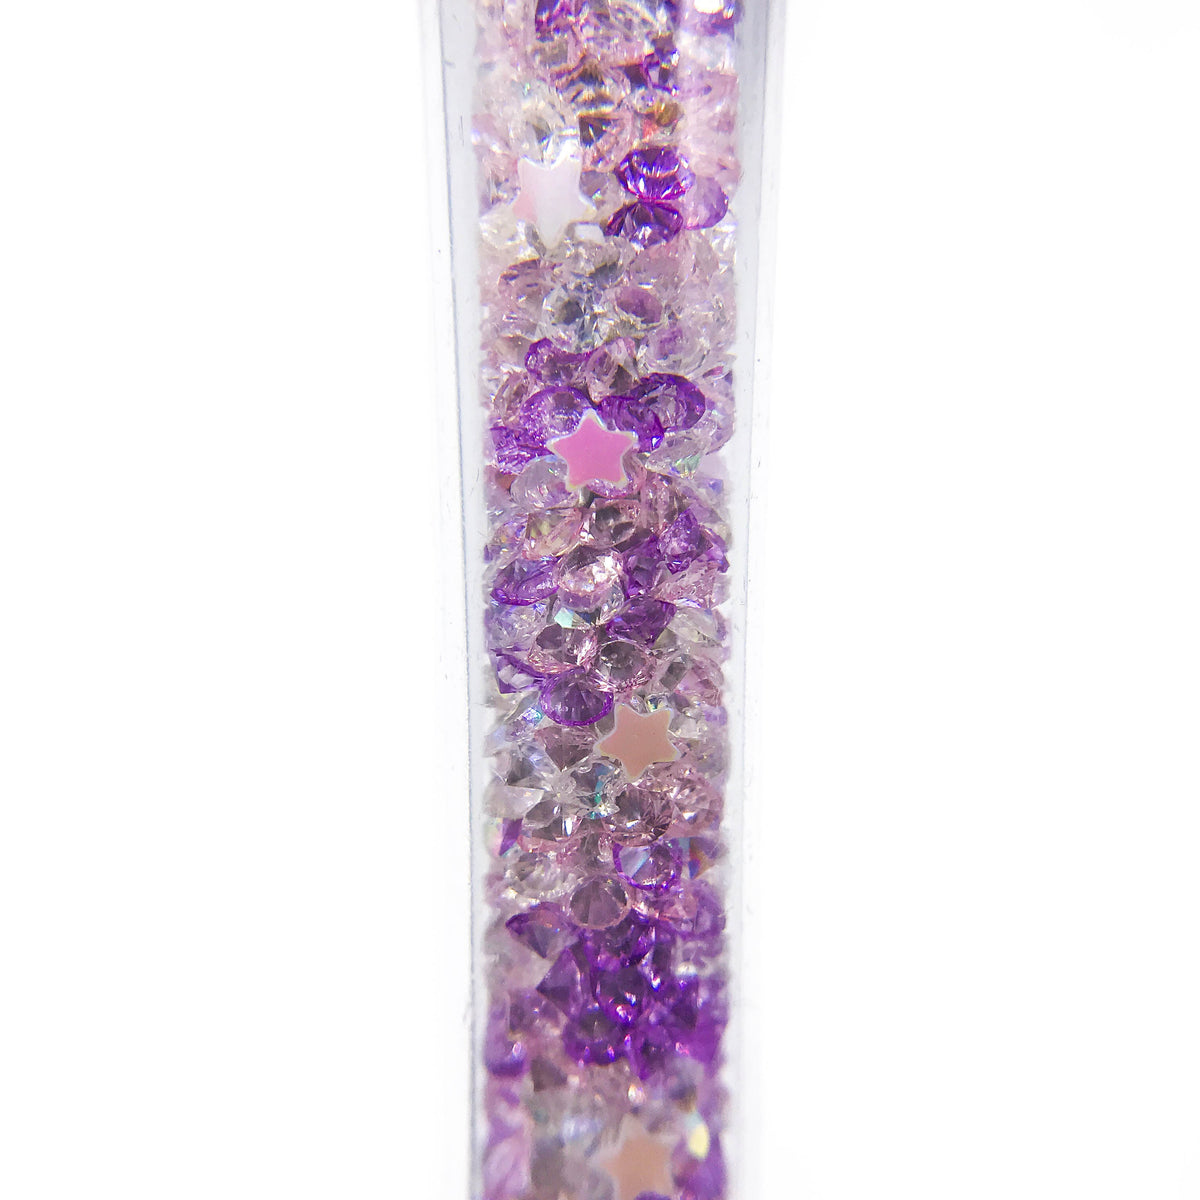 Stardust Imperfect Crystal VBPen | limited pen